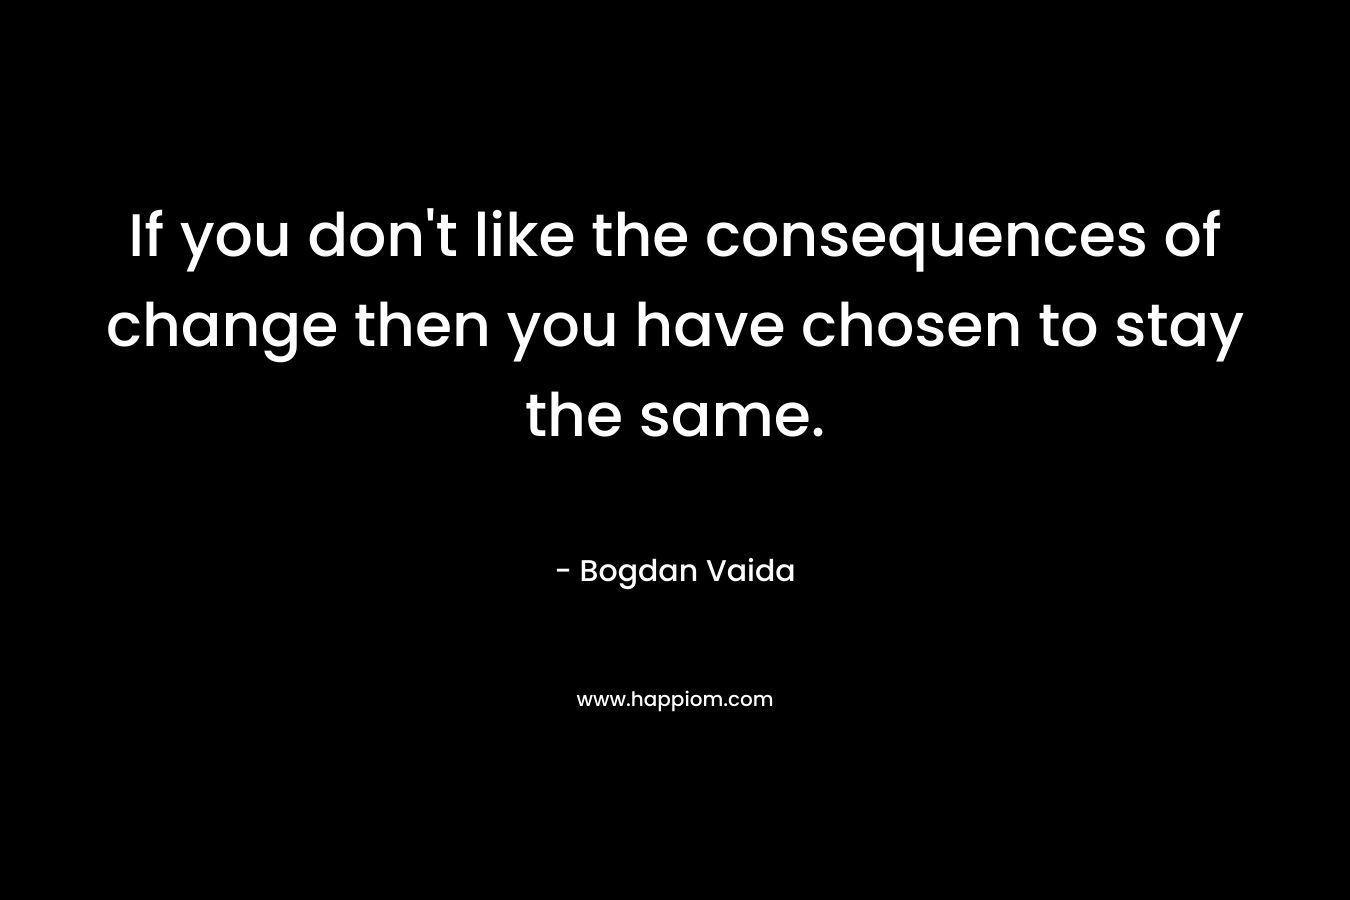 If you don't like the consequences of change then you have chosen to stay the same.